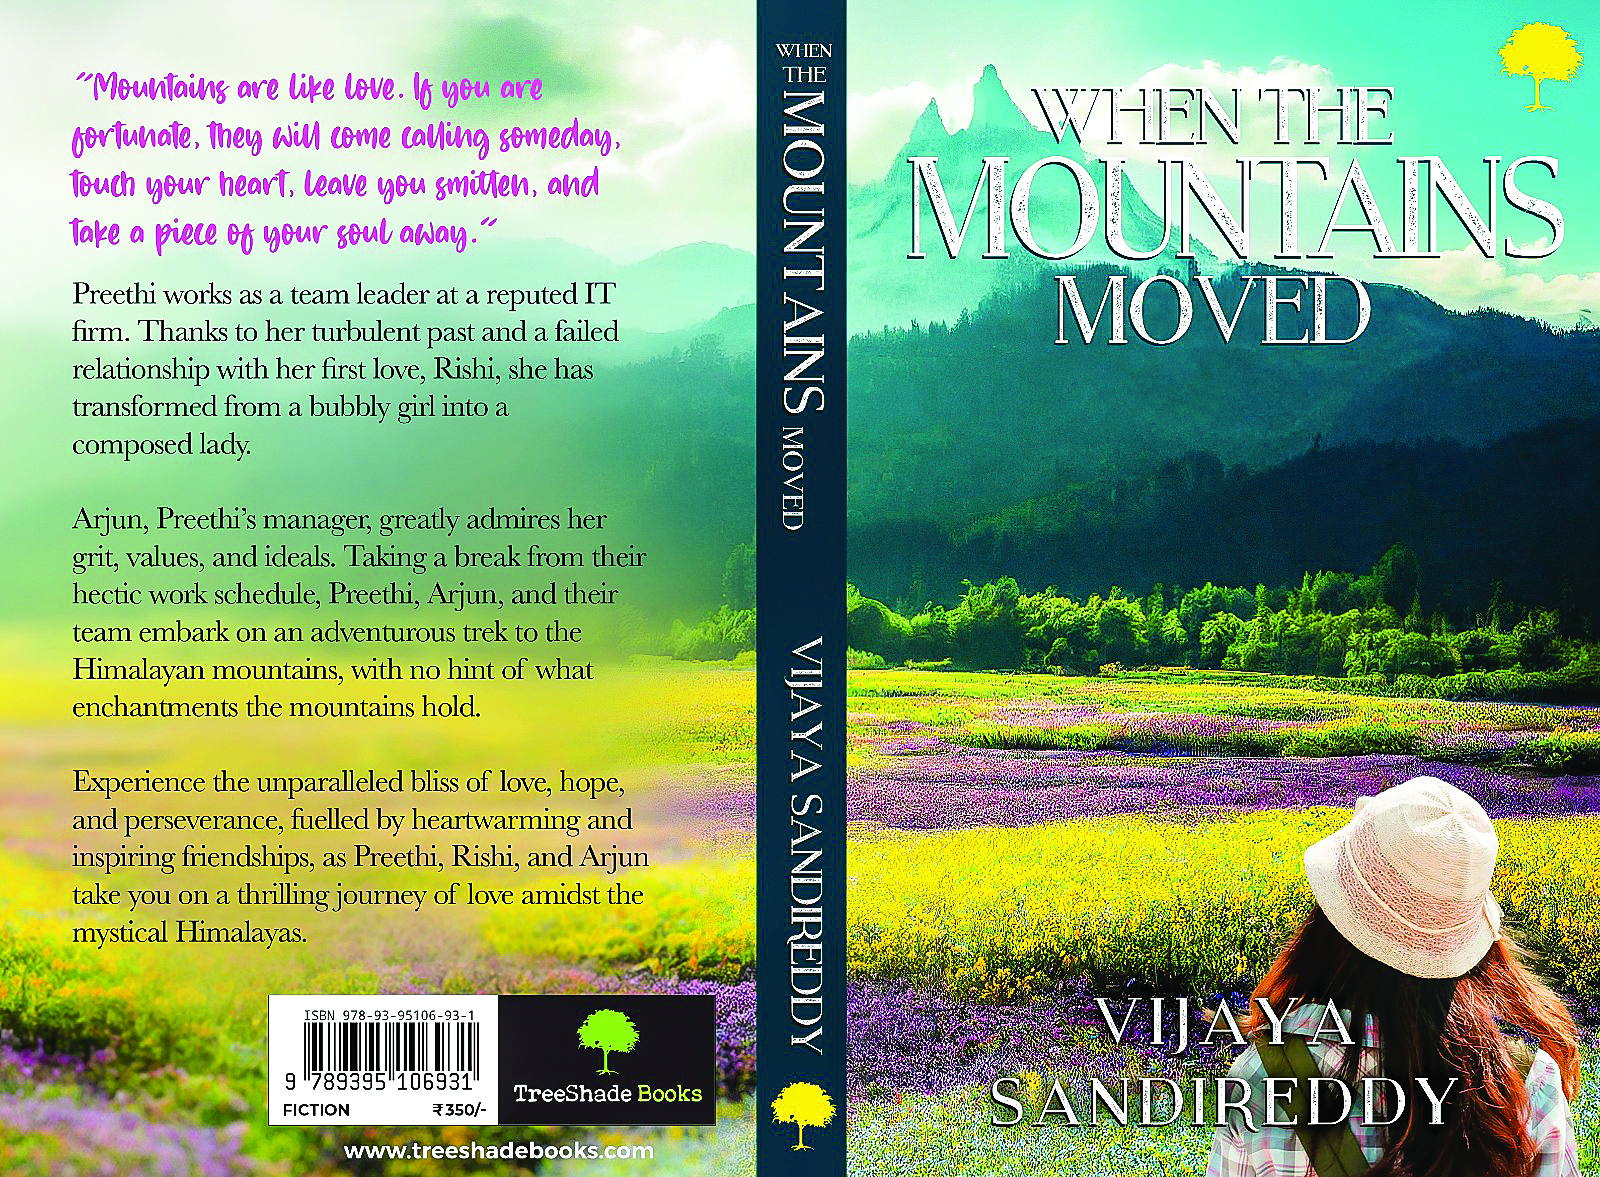 Novel explores love, friendship, and resilience in the Himalayas